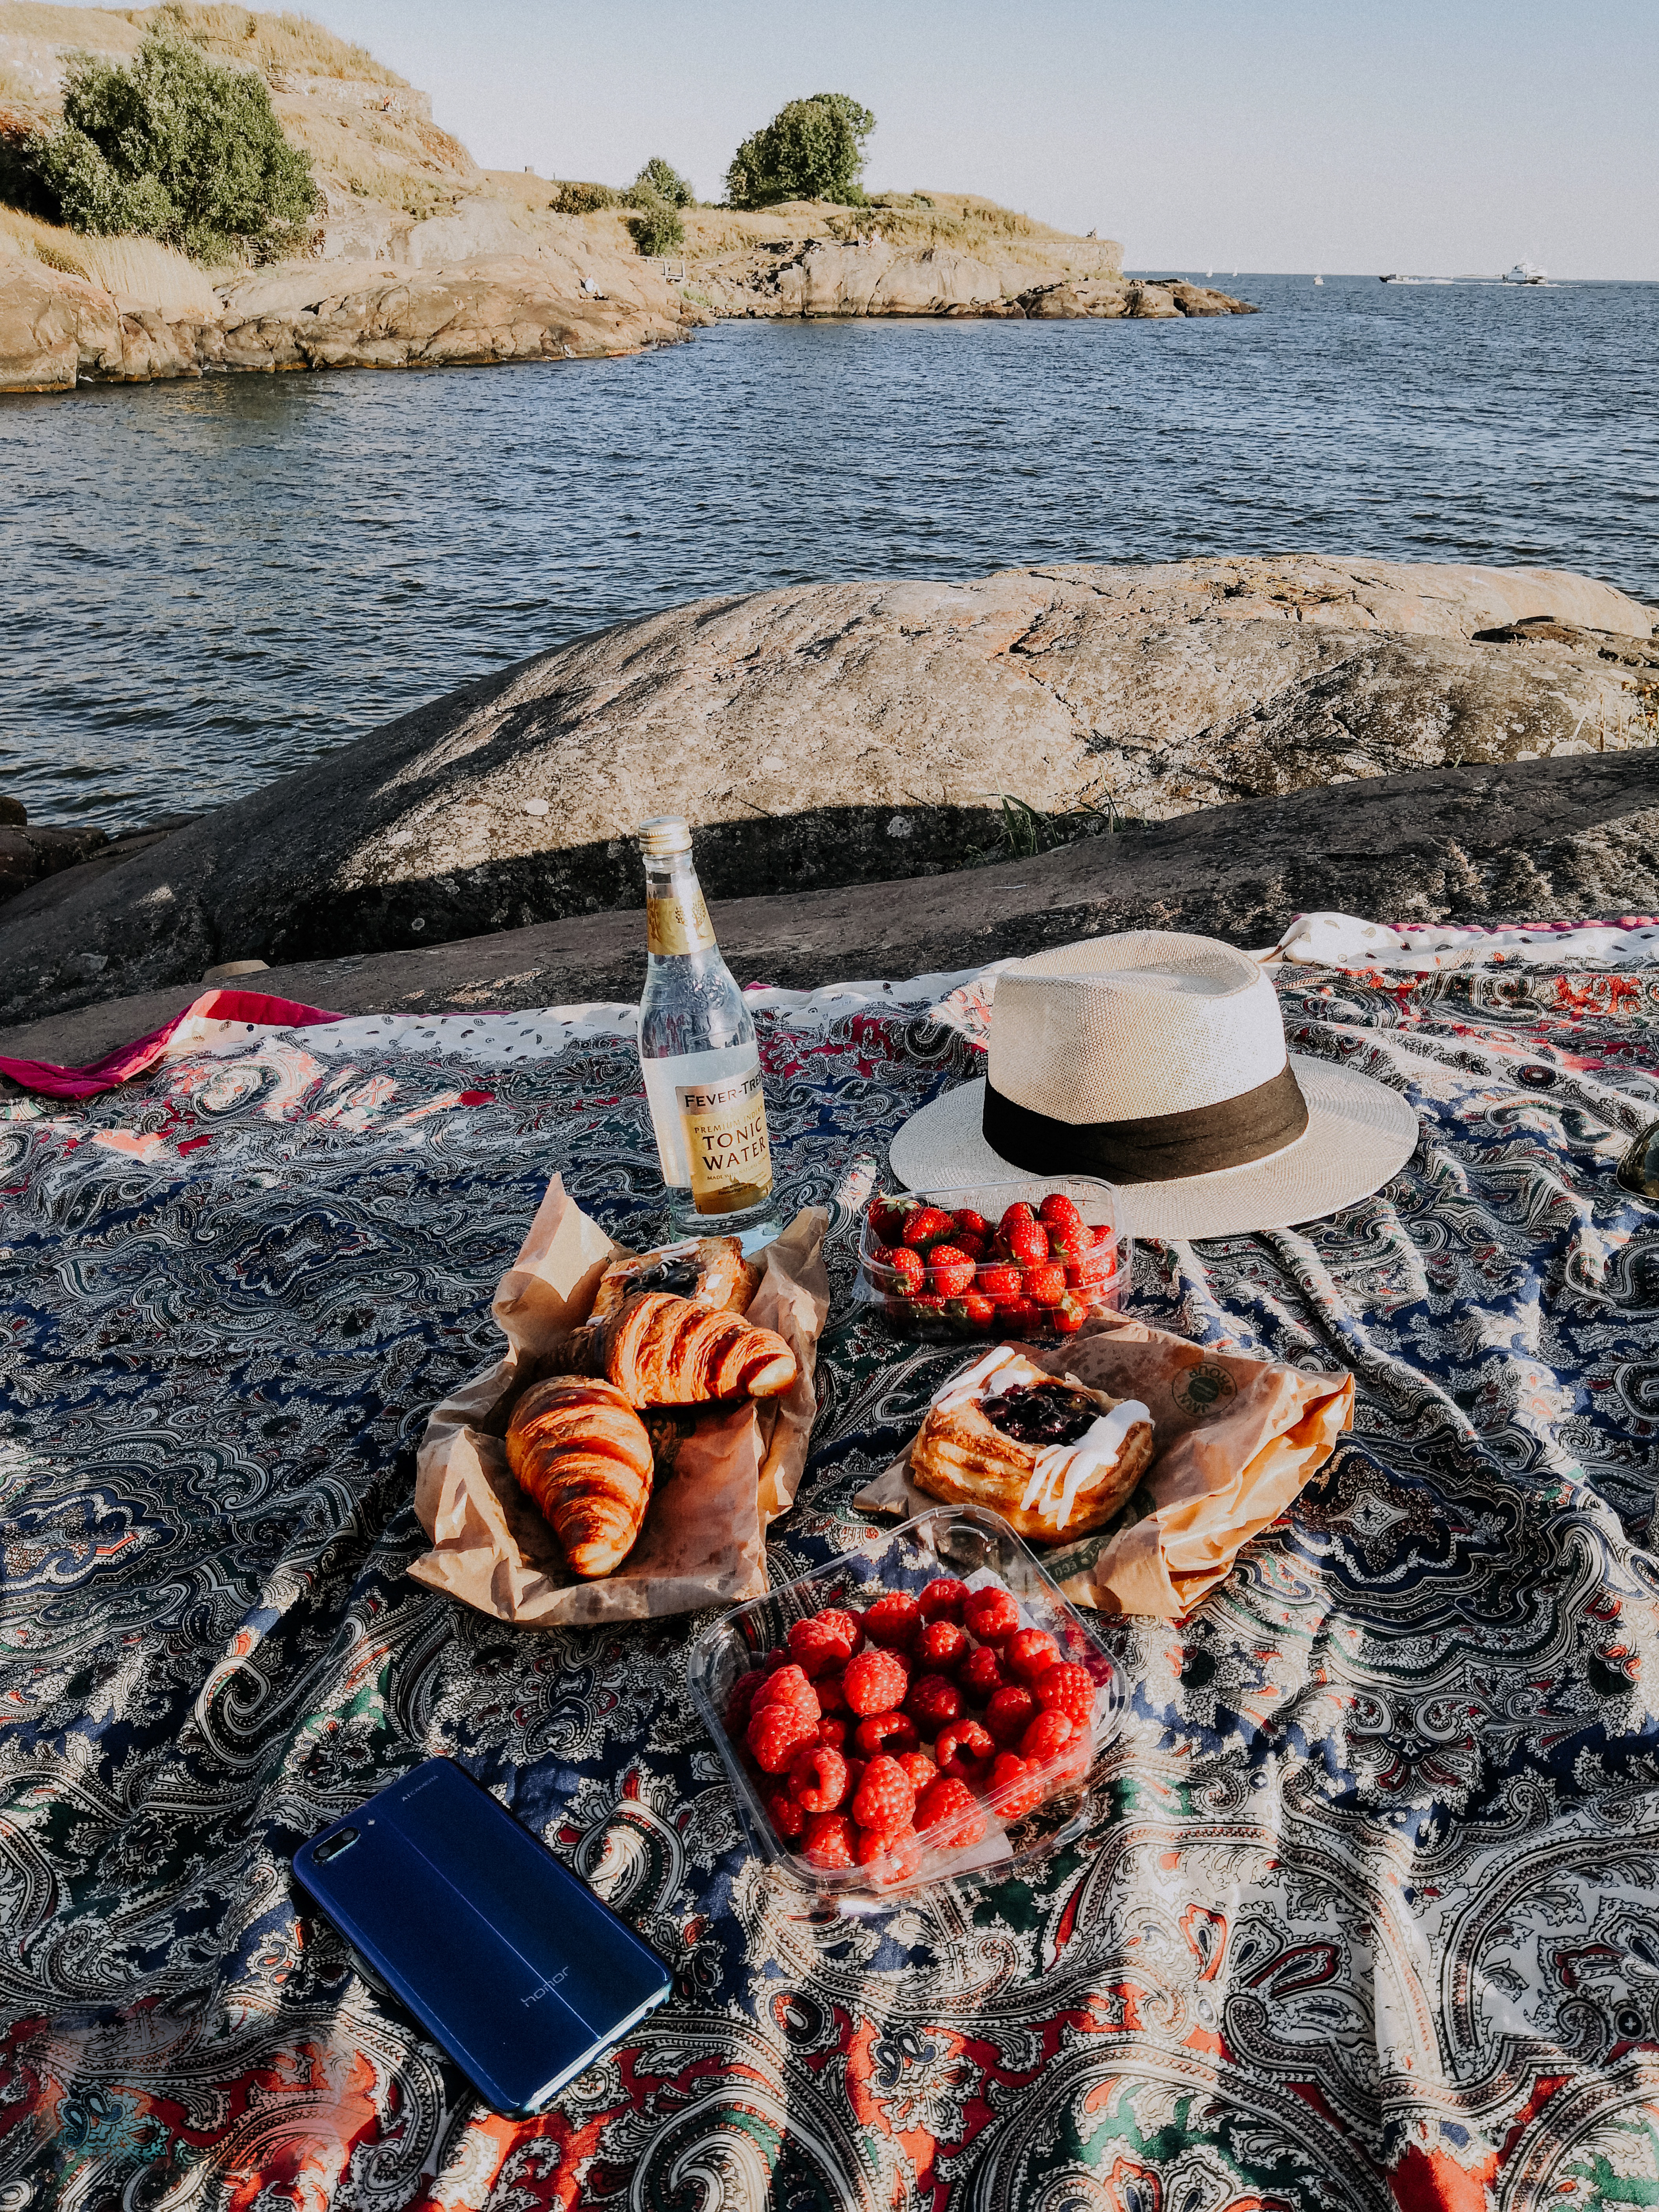 A picnic setting on the rocks in the Suomenlinna fortress